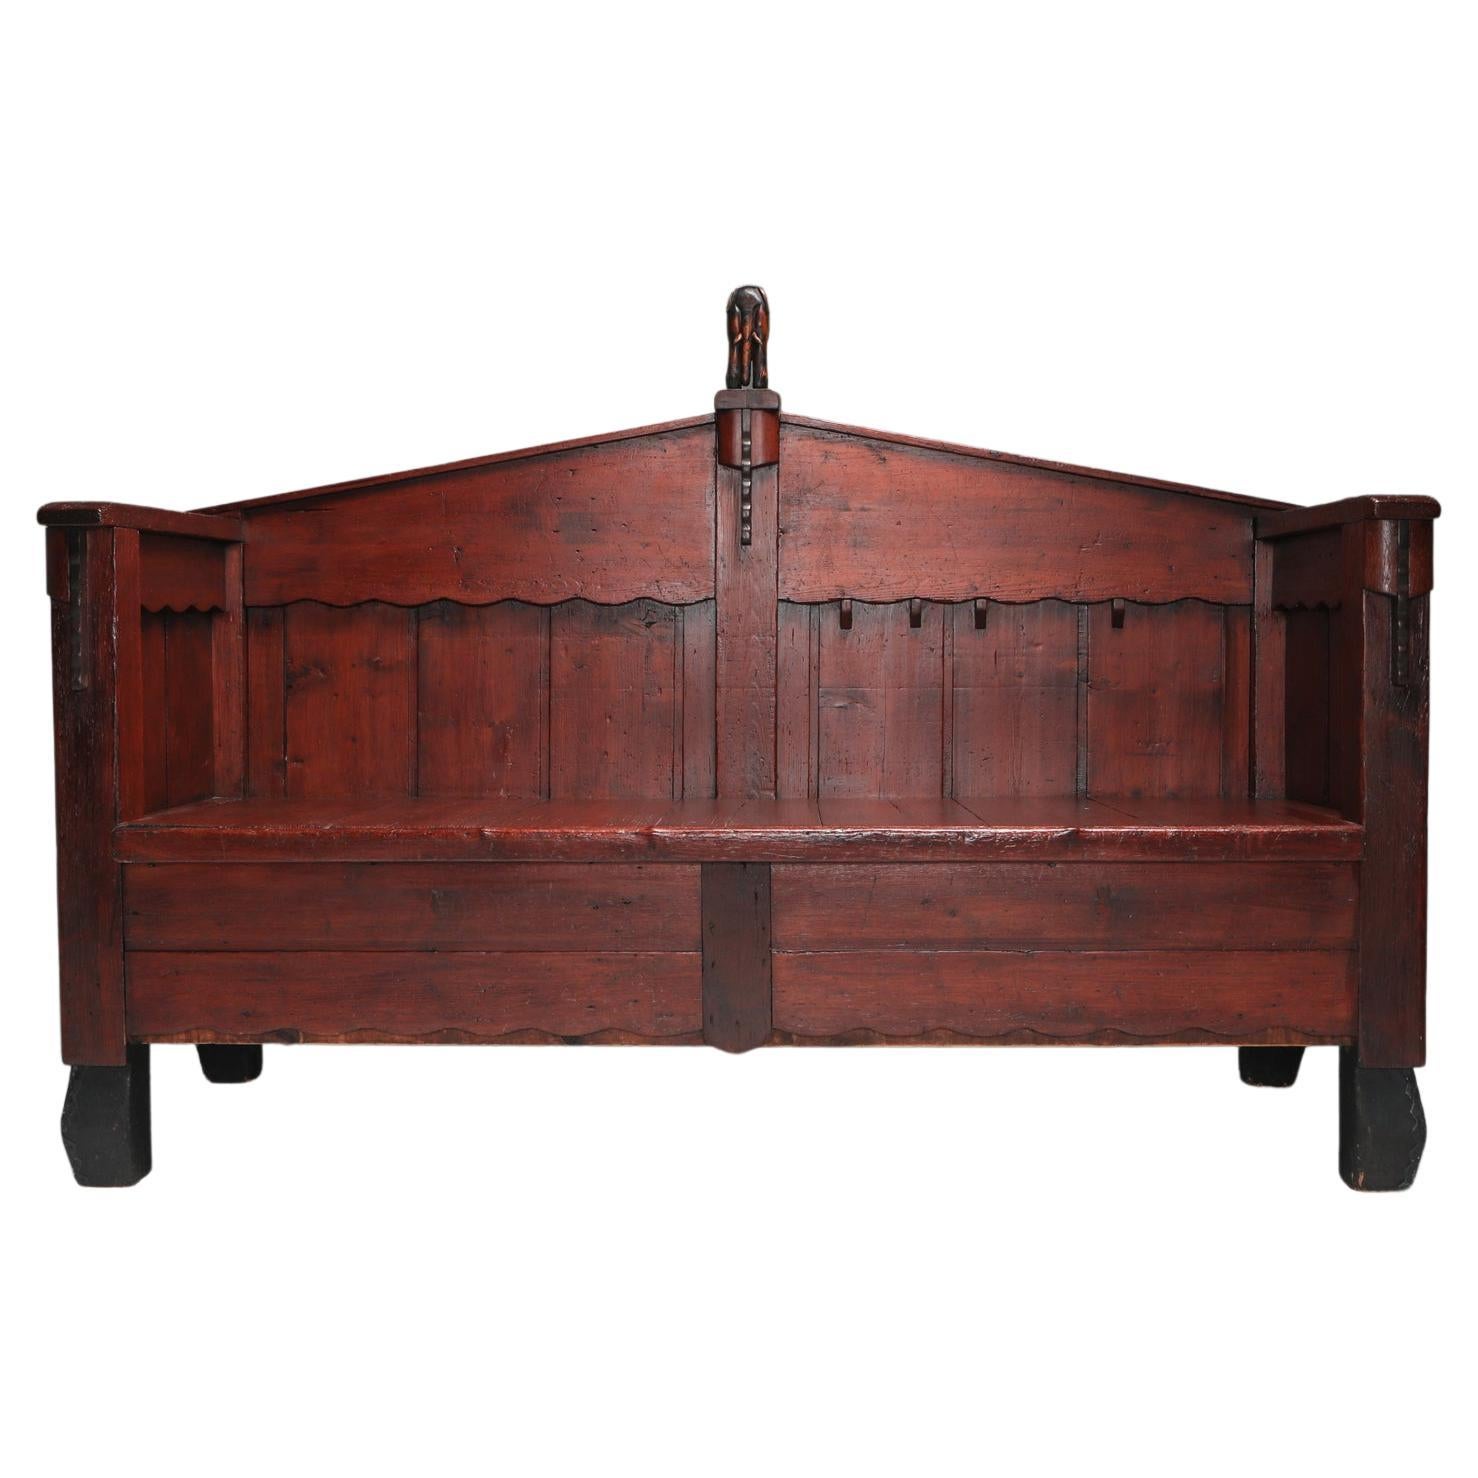 Expressionist Amsterdamse School Bench, in Pine, 1920s